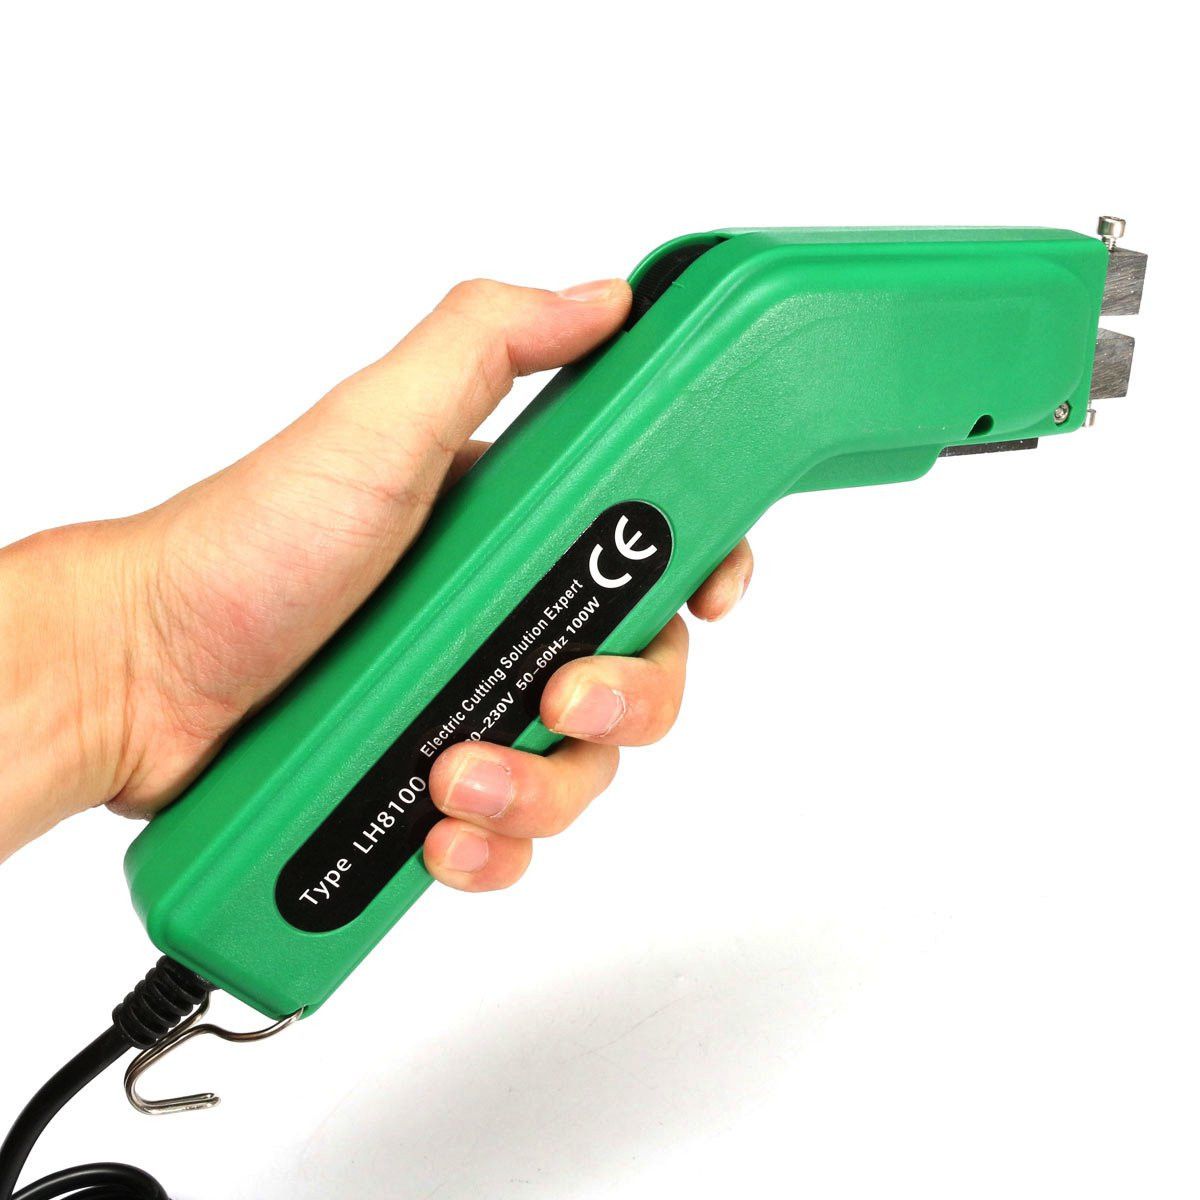 220V-100W-Banner-Hot-Heating-Electric-Heating-Cutter-Hot-Cutter-Tool-1064407